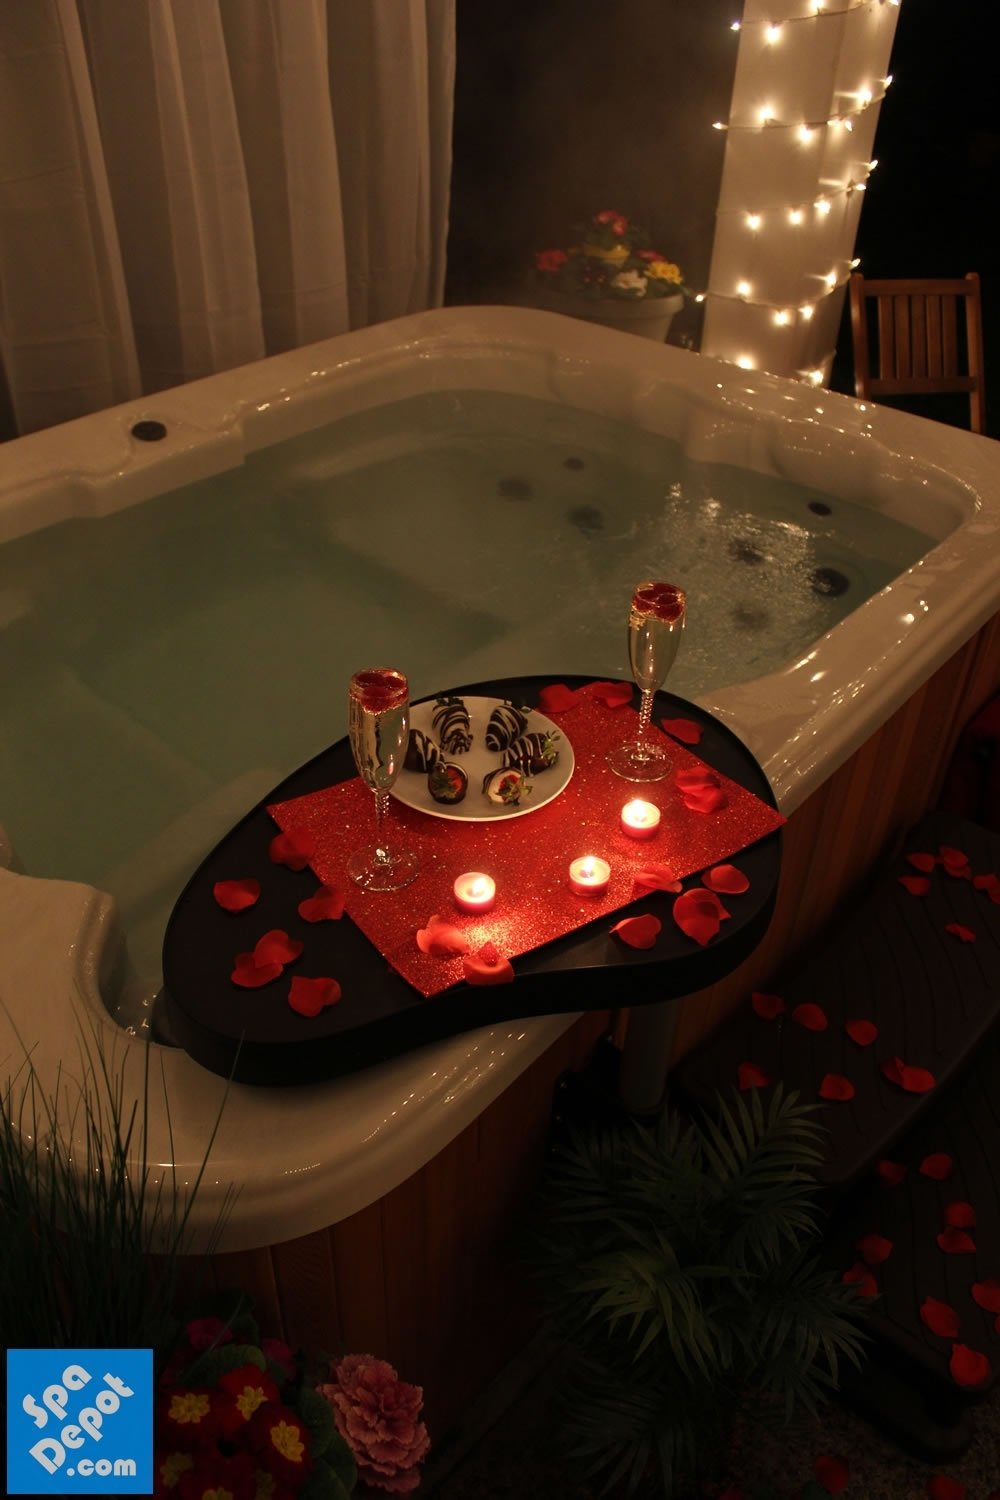 10 Awesome Romantic Date Ideas Valentines Day 5 ways to create a romantic valentines day at home holidays 3 2022